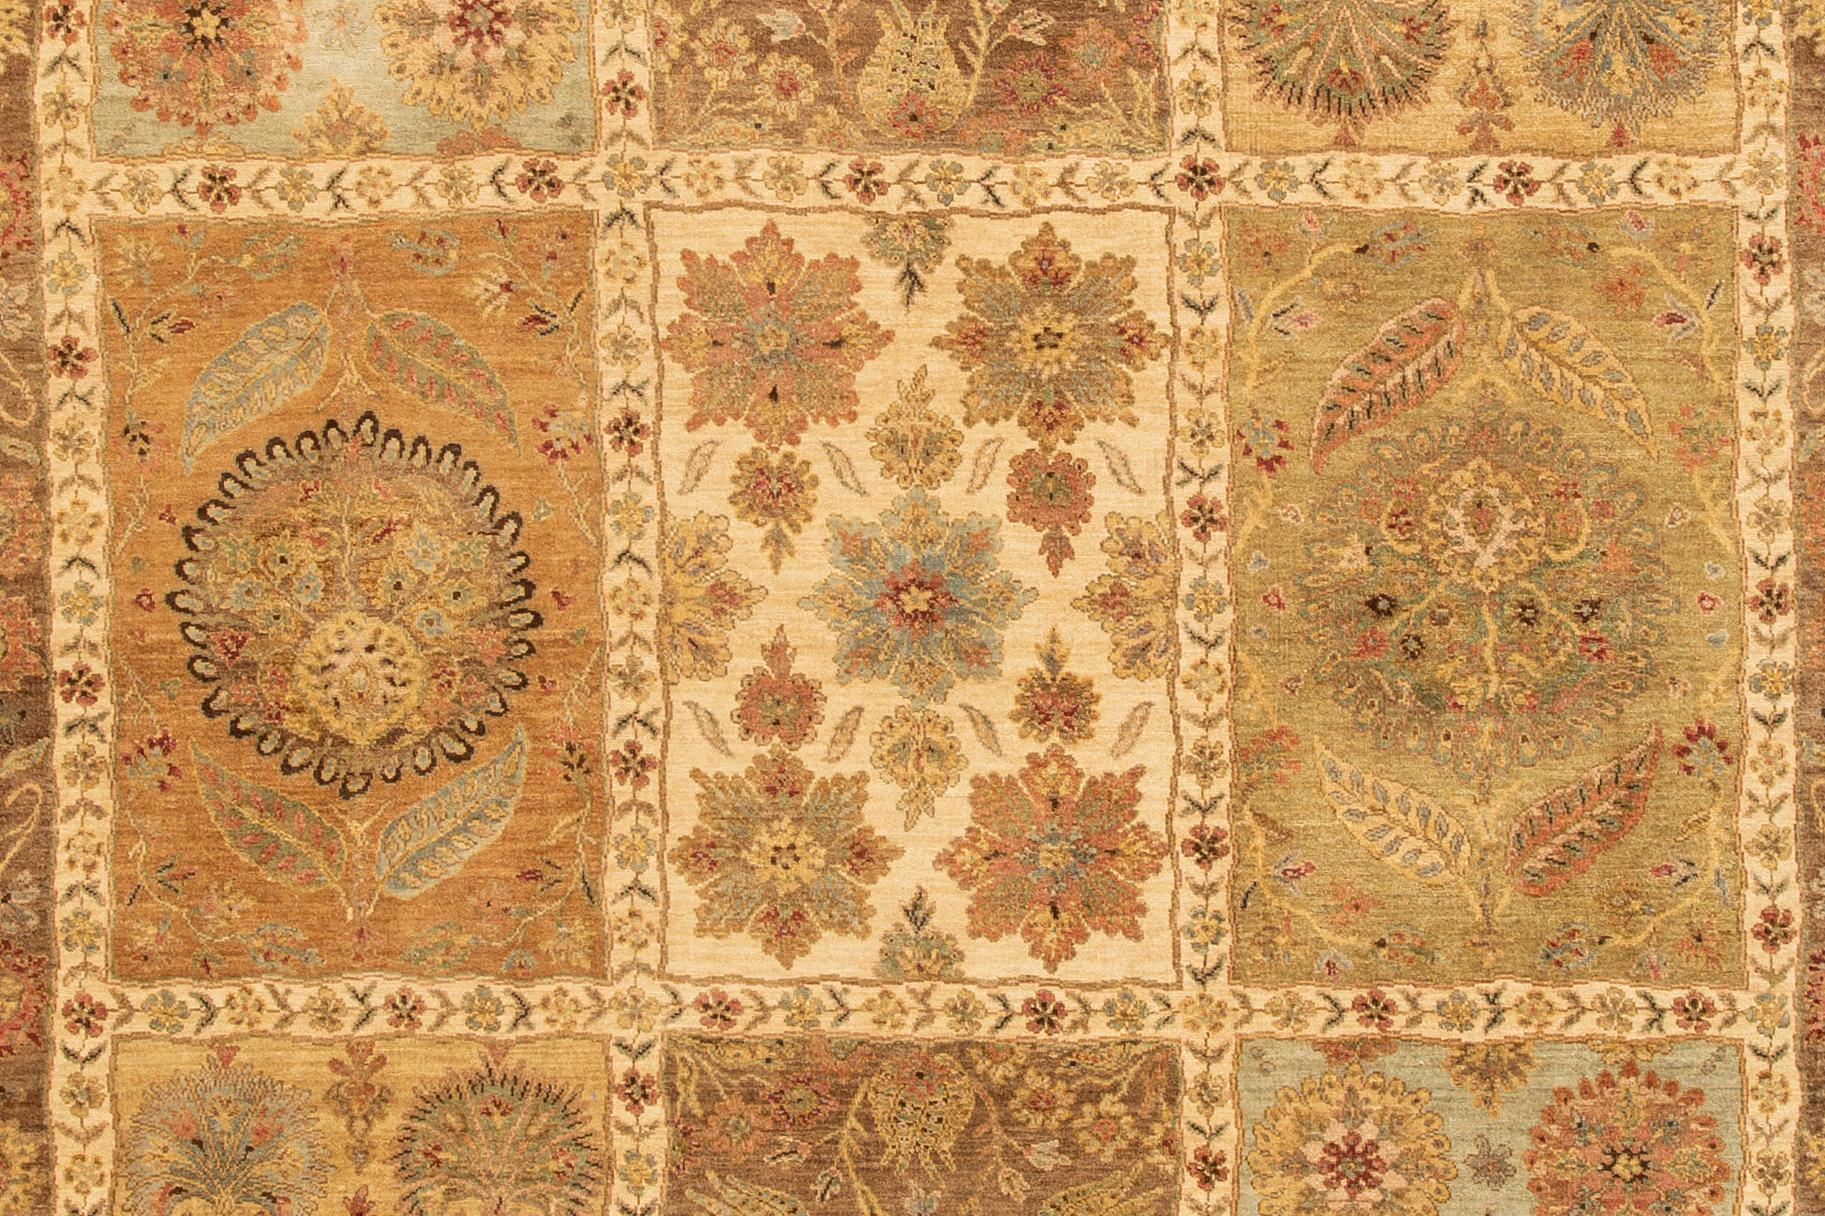 Modern Indian Tabriz style rug with an all-over geometric design. This piece has fine details, great colors, and a beautiful design. It would be the perfect addition to your home. This rug measures 9'1